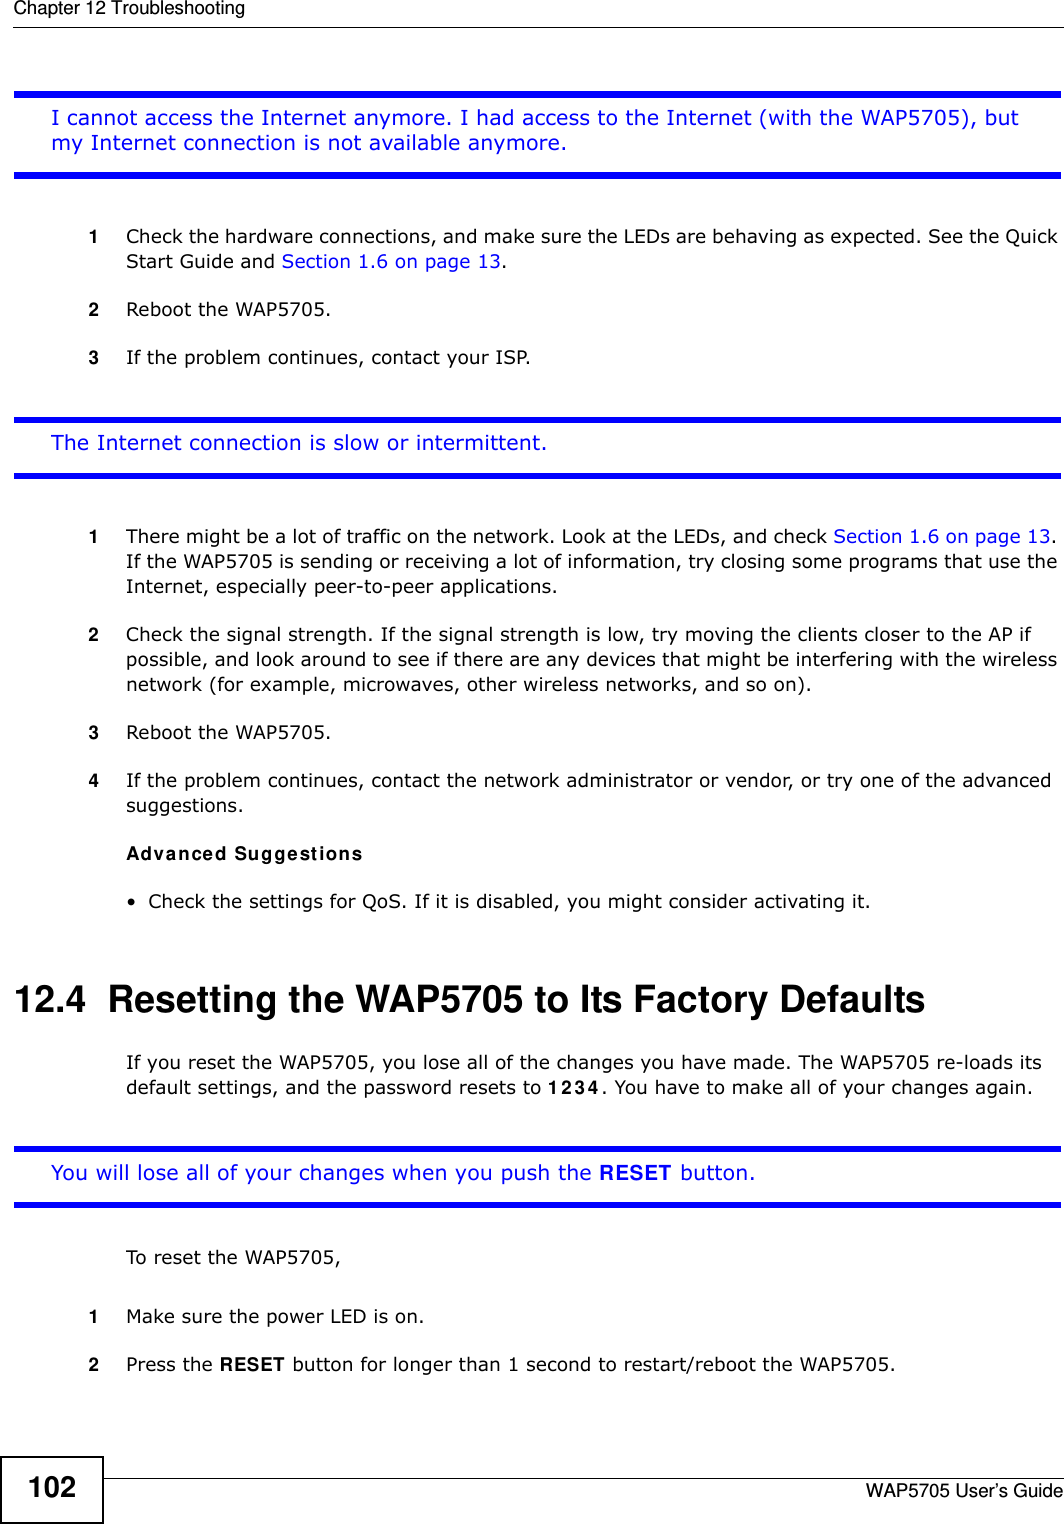 Chapter 12 TroubleshootingWAP5705 User’s Guide102I cannot access the Internet anymore. I had access to the Internet (with the WAP5705), but my Internet connection is not available anymore.1Check the hardware connections, and make sure the LEDs are behaving as expected. See the Quick Start Guide and Section 1.6 on page 13. 2Reboot the WAP5705.3If the problem continues, contact your ISP. The Internet connection is slow or intermittent.1There might be a lot of traffic on the network. Look at the LEDs, and check Section 1.6 on page 13. If the WAP5705 is sending or receiving a lot of information, try closing some programs that use the Internet, especially peer-to-peer applications.2Check the signal strength. If the signal strength is low, try moving the clients closer to the AP if possible, and look around to see if there are any devices that might be interfering with the wireless network (for example, microwaves, other wireless networks, and so on).3Reboot the WAP5705.4If the problem continues, contact the network administrator or vendor, or try one of the advanced suggestions.Adva n ced Suggestions• Check the settings for QoS. If it is disabled, you might consider activating it. 12.4  Resetting the WAP5705 to Its Factory Defaults If you reset the WAP5705, you lose all of the changes you have made. The WAP5705 re-loads its default settings, and the password resets to 1 2 3 4 . You have to make all of your changes again.You will lose all of your changes when you push the RESET button.To reset the WAP5705,1Make sure the power LED is on.2Press the RESET button for longer than 1 second to restart/reboot the WAP5705.